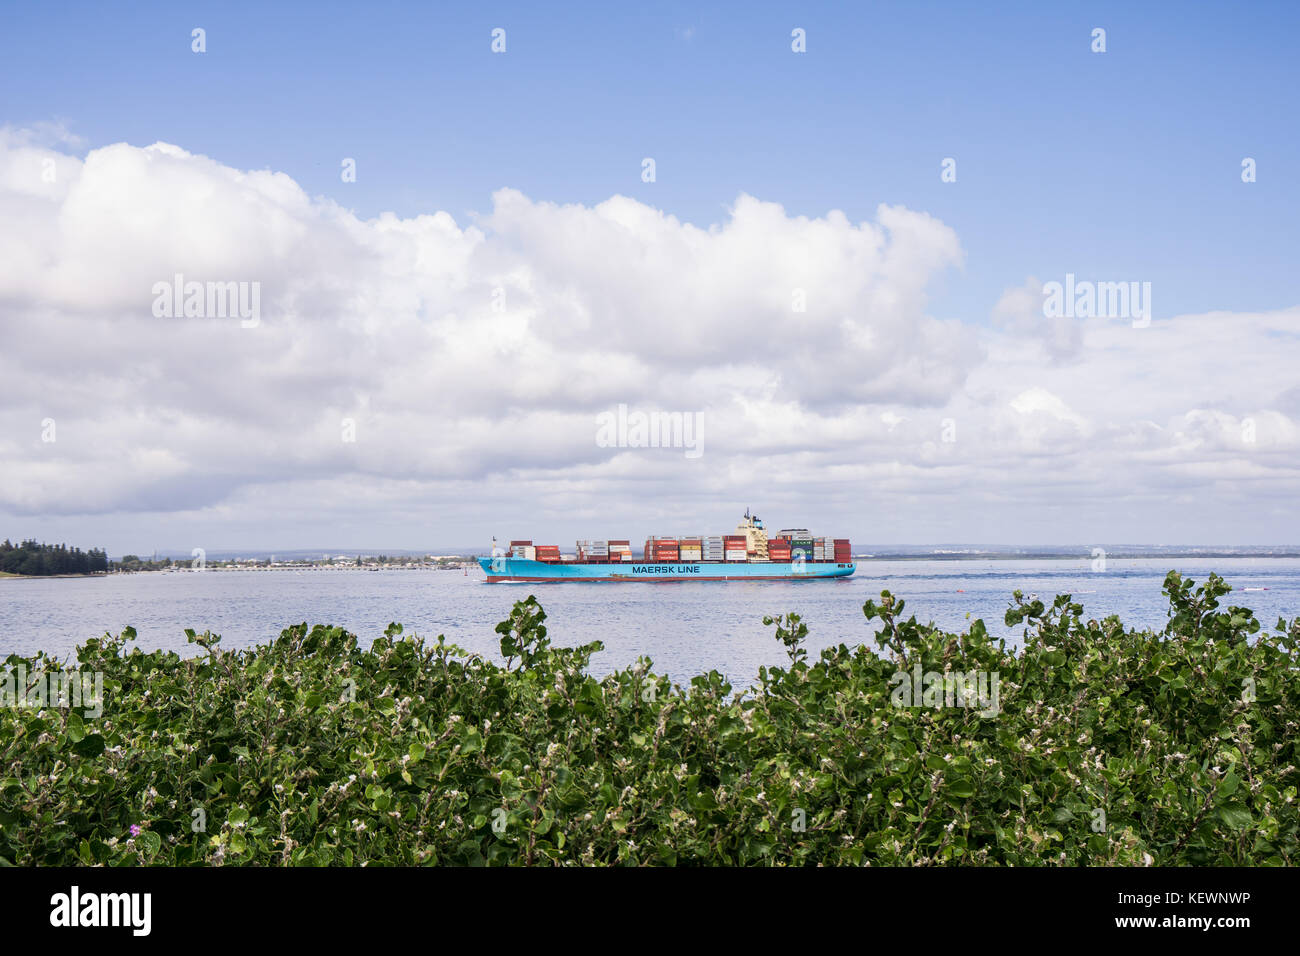 A container ship steams out of Botany Bay, Australia Stock Photo